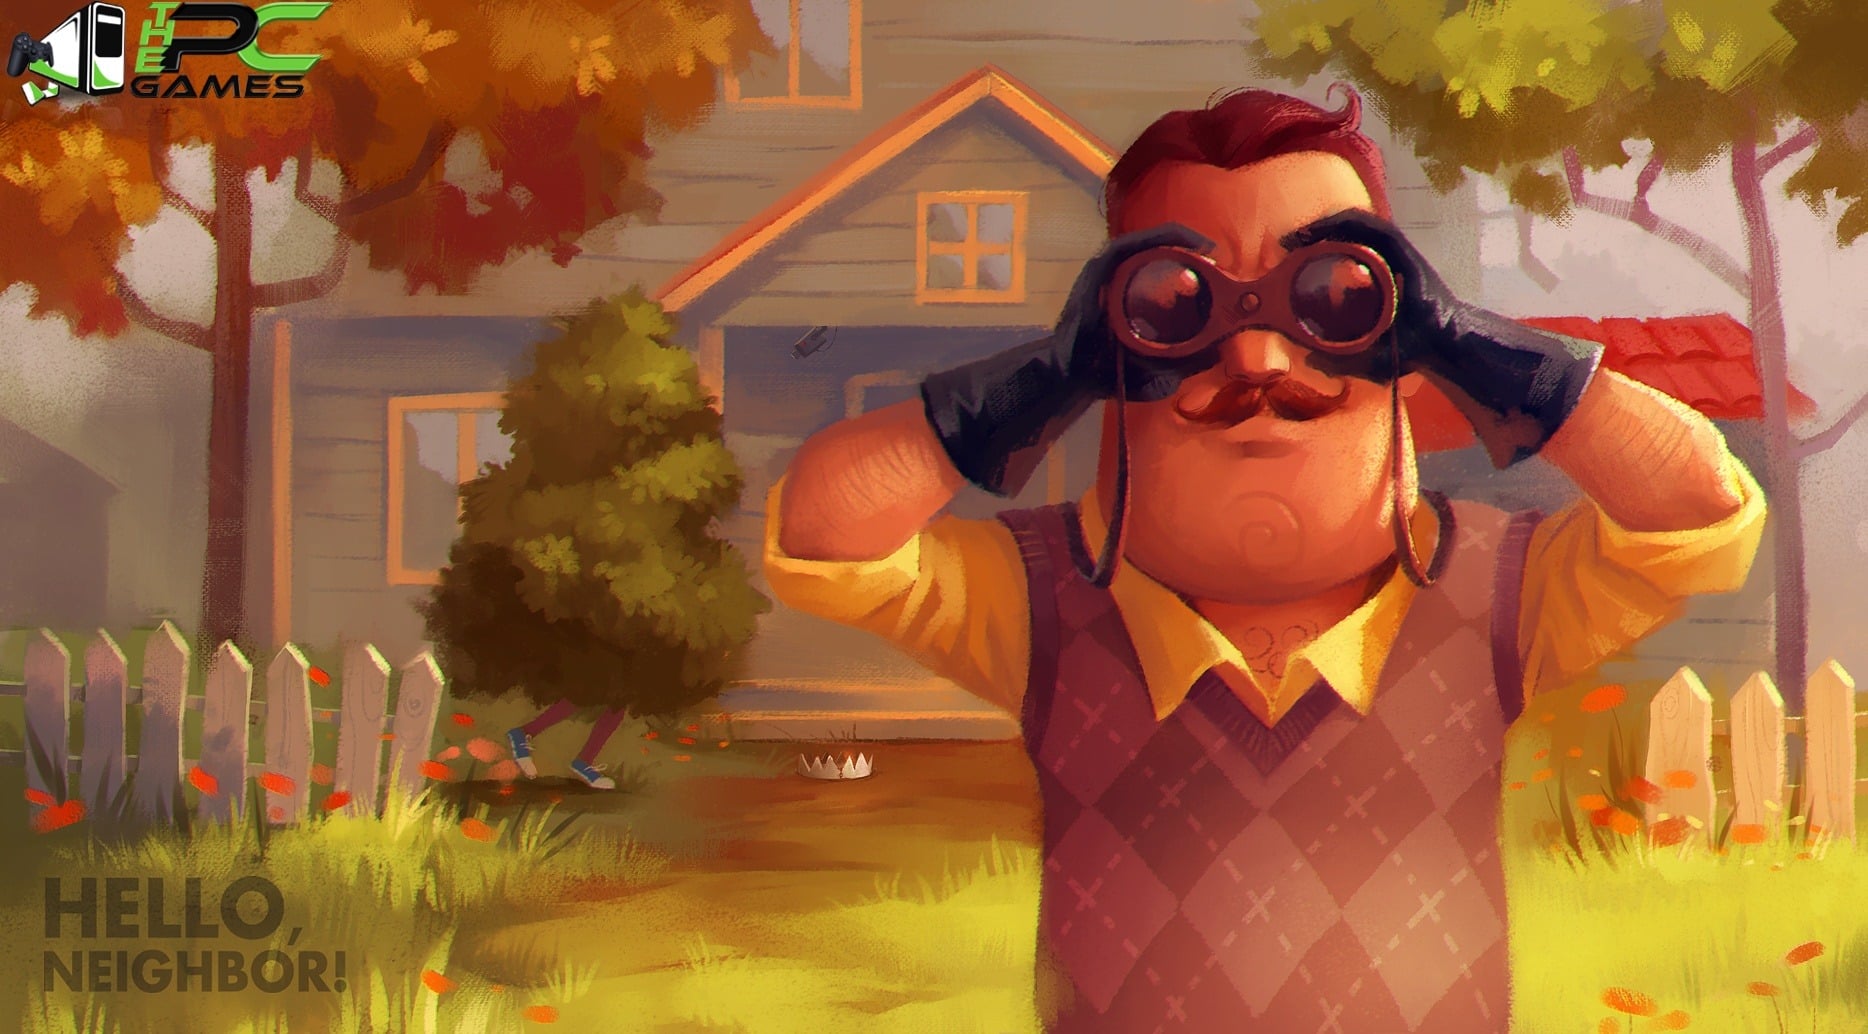 Hello neighbor alpha 4 download pc safest free game download sites